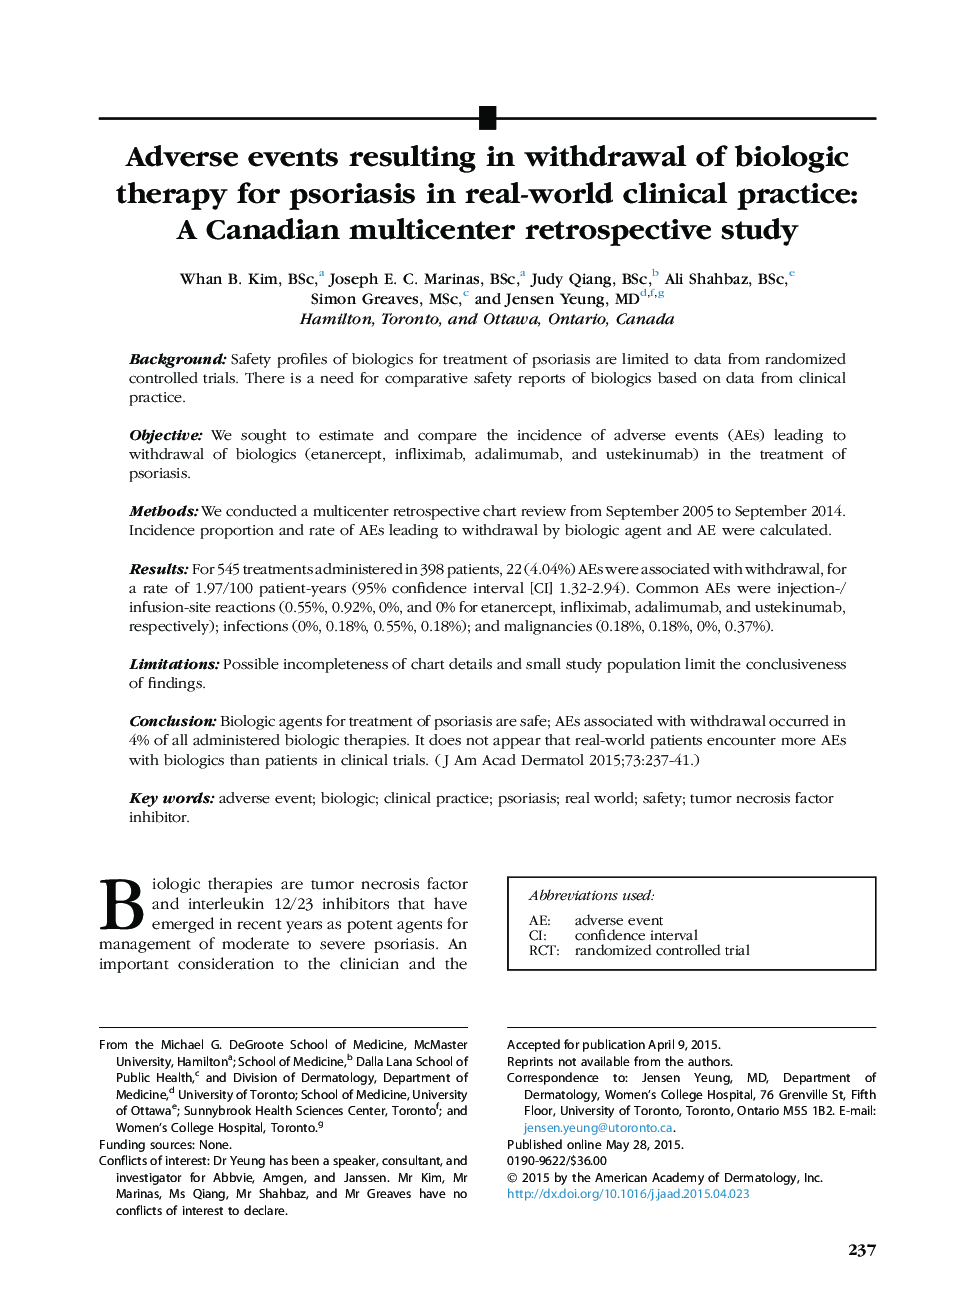 Original articleAdverse events resulting in withdrawal of biologic therapy for psoriasis in real-world clinical practice: A Canadian multicenter retrospective study